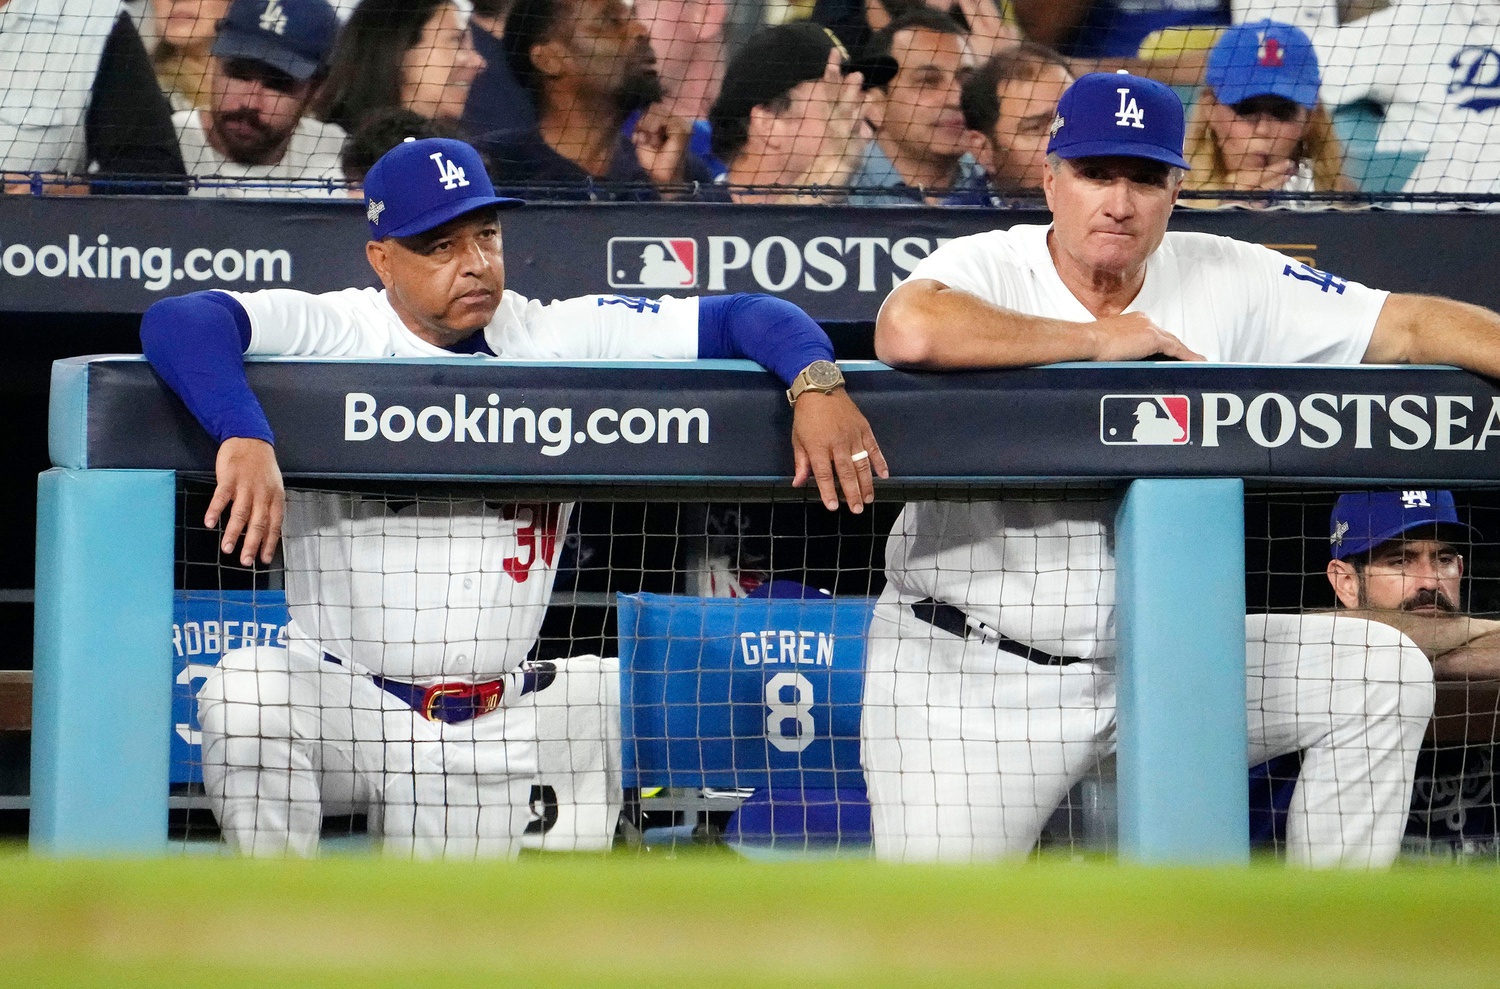 Los Angeles Dodgers' manager Dave Roberts adjusts field positions in the  second inning during the Dodgers home opener agains the Arizona  Diamondbacks at Dodger Stadium in Los Angeles on April 12, 2016.